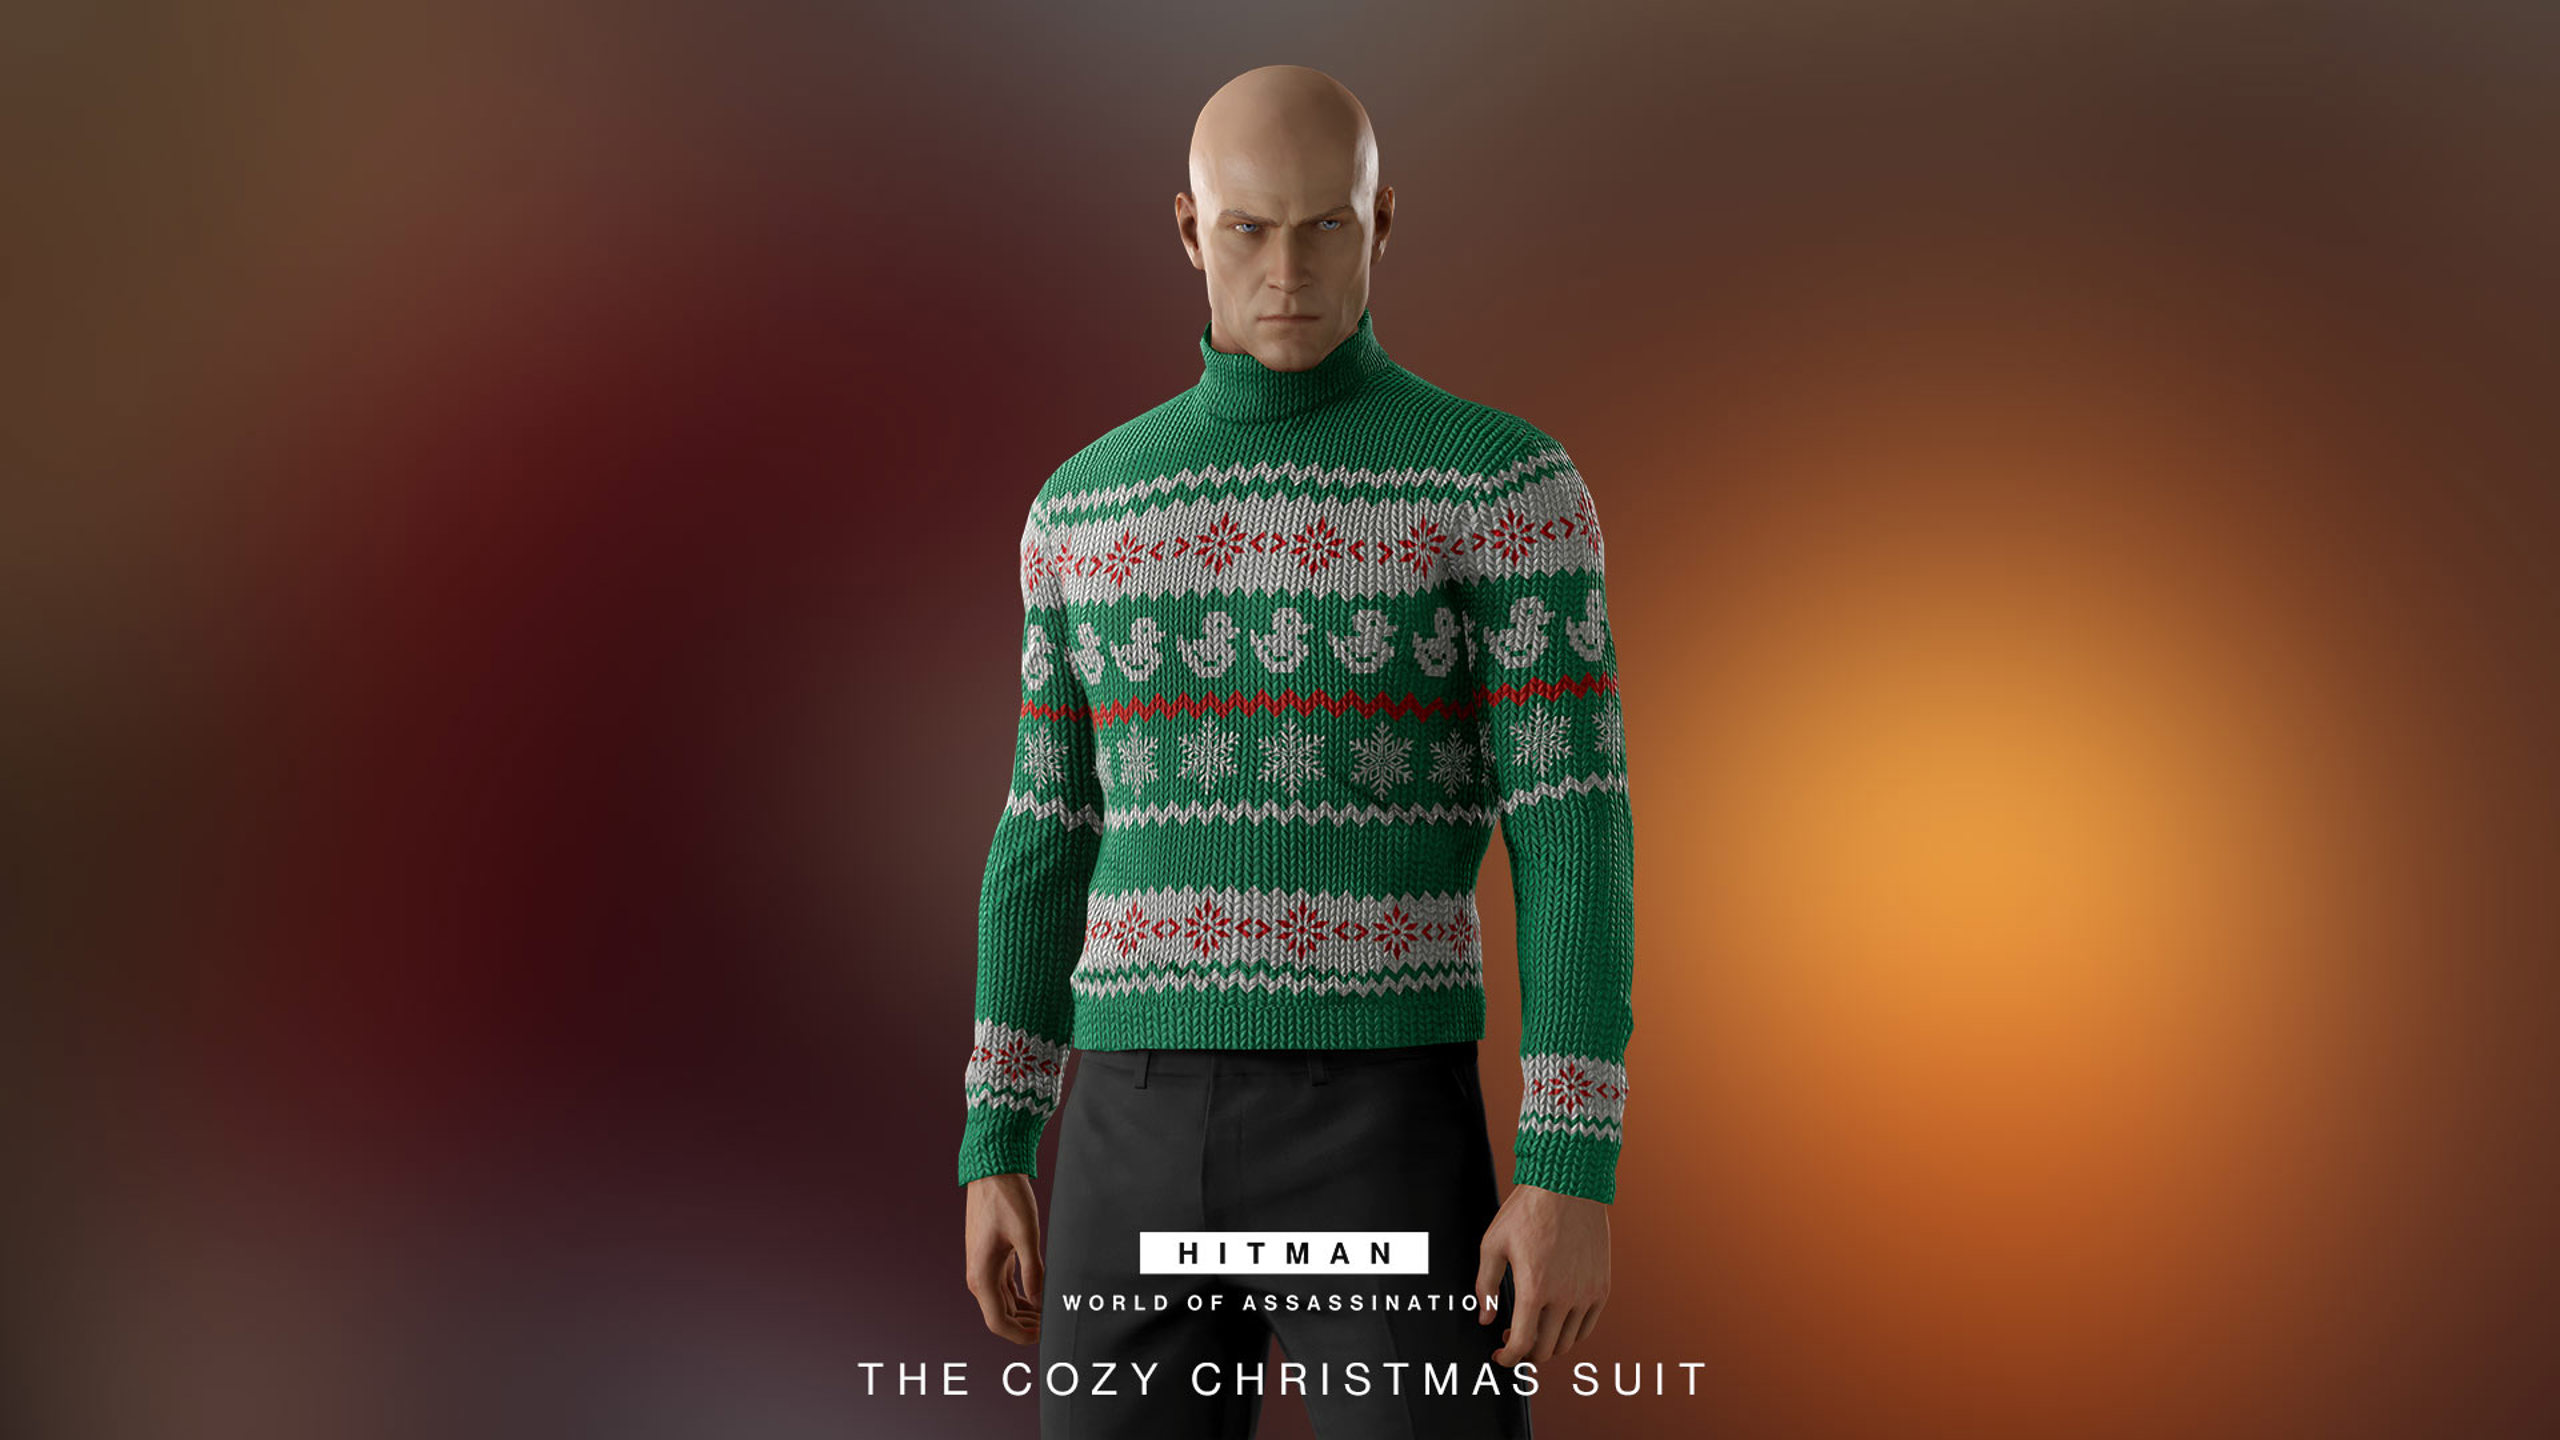 Hitman 3 Winter Roadmap 2022 Gives Details About Holiday Hoarders, the Icon  and More